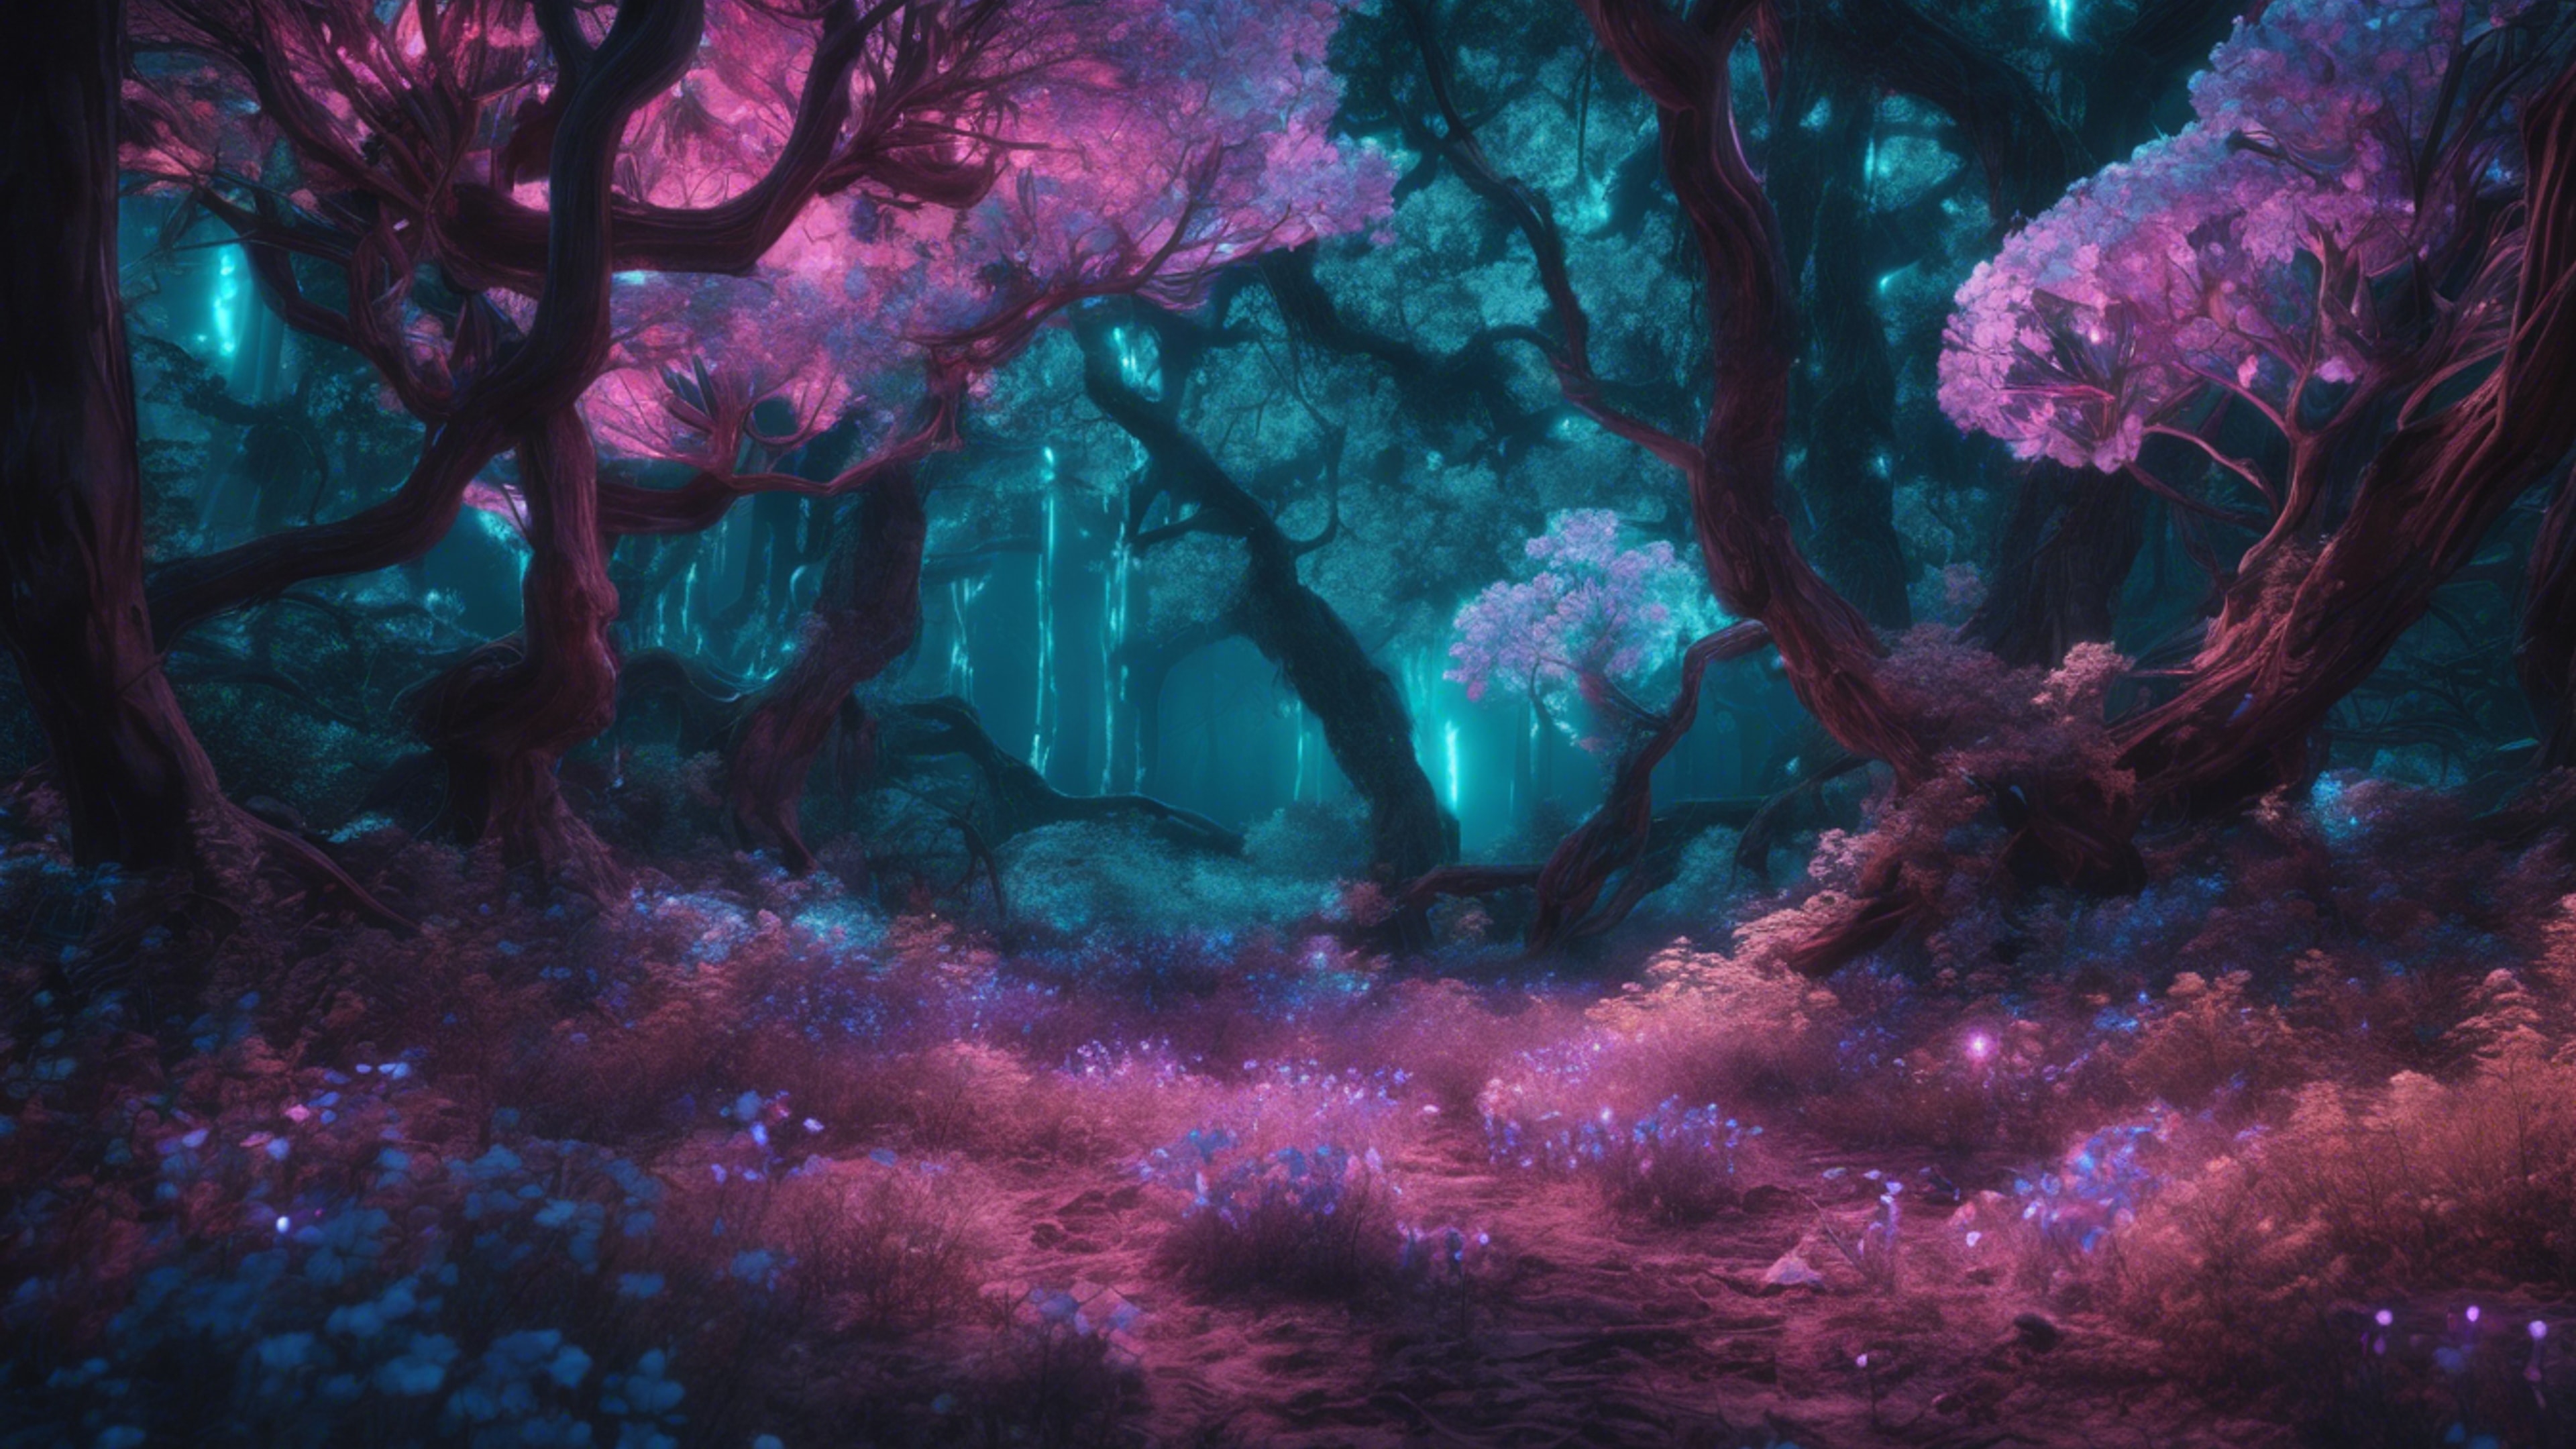 A Y2K style digital forest with illuminated bioluminescent trees and neon glowing flowers.壁紙[de86584624734c4ebdfb]